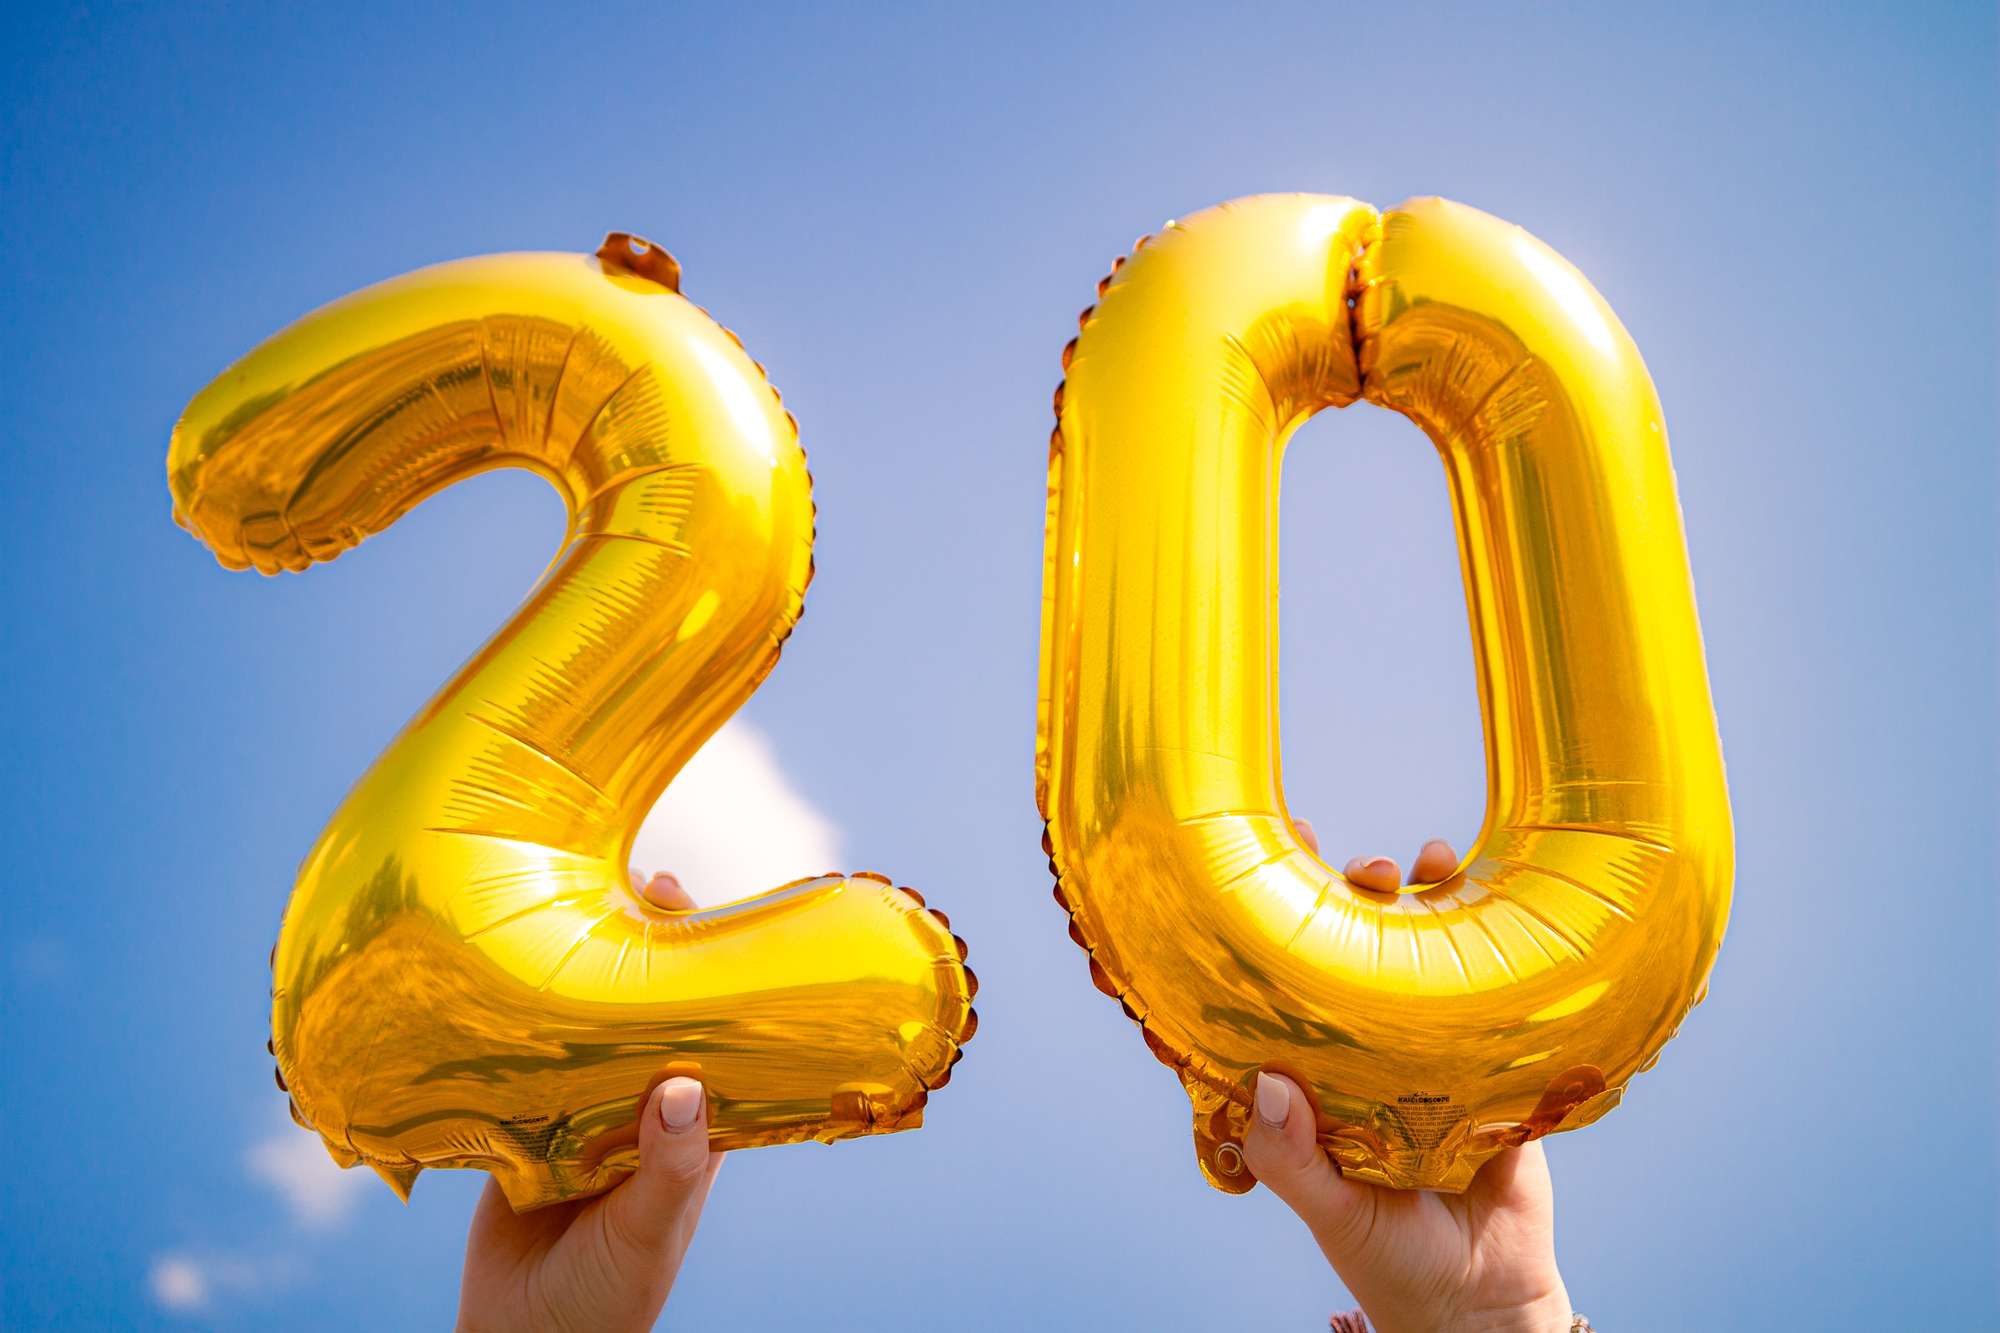 Two hands, each holding a large ballon in the shape of a digit, forming the number 20